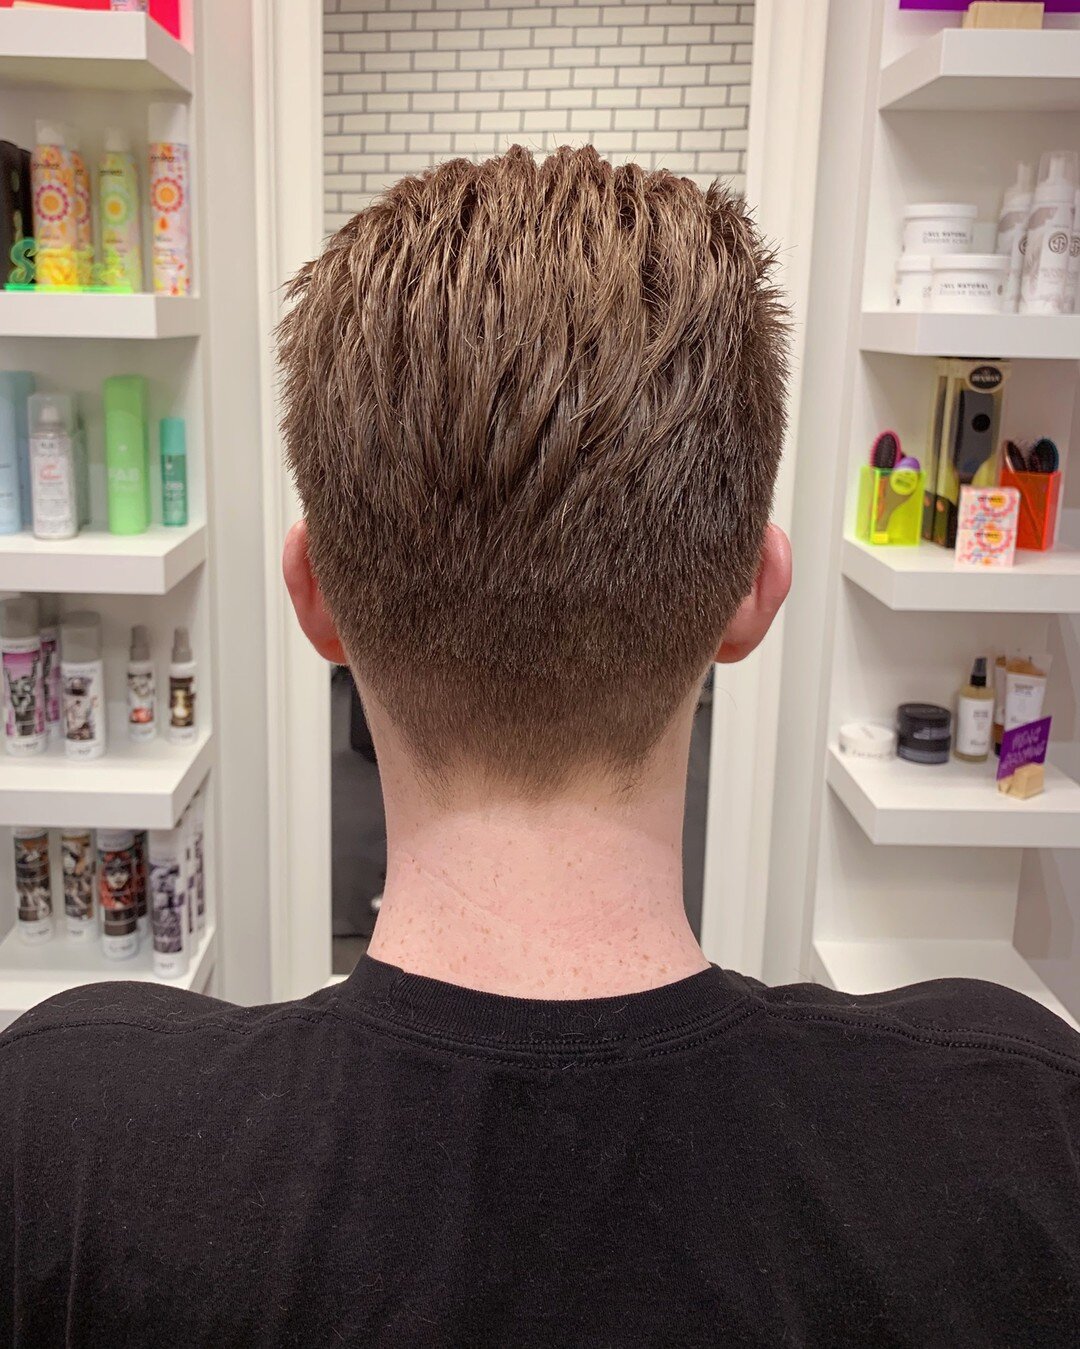 Styled with a mix of matte and shine pomades. Sometimes when you mix products you get the best of both worlds. His hair needs a good holding product because there's a lot of hair, but it also needs moisture and shine so it doesn't look dried out and 